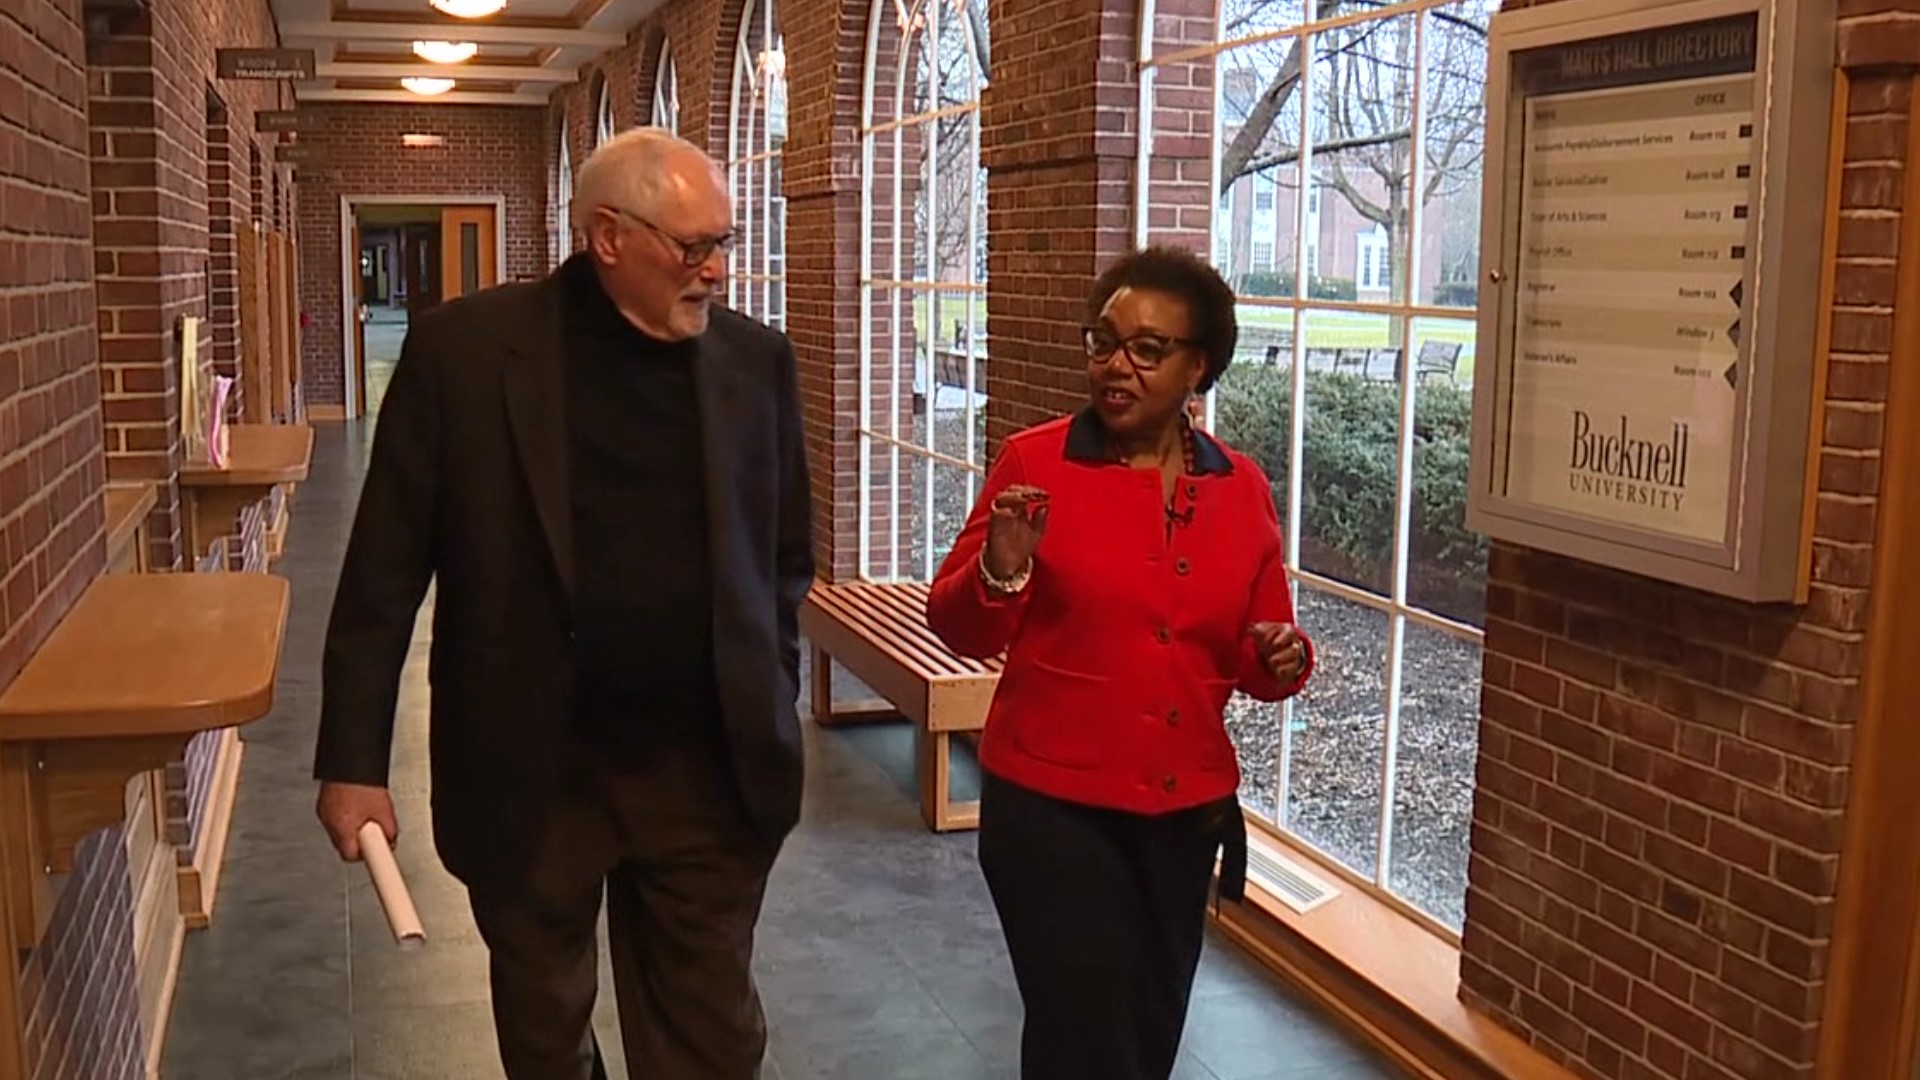 Newswatch 16's Lisa Washington introduces us to a woman who has returned to Bucknell University in Union County to lead its Equity and Inclusive Excellence Office.